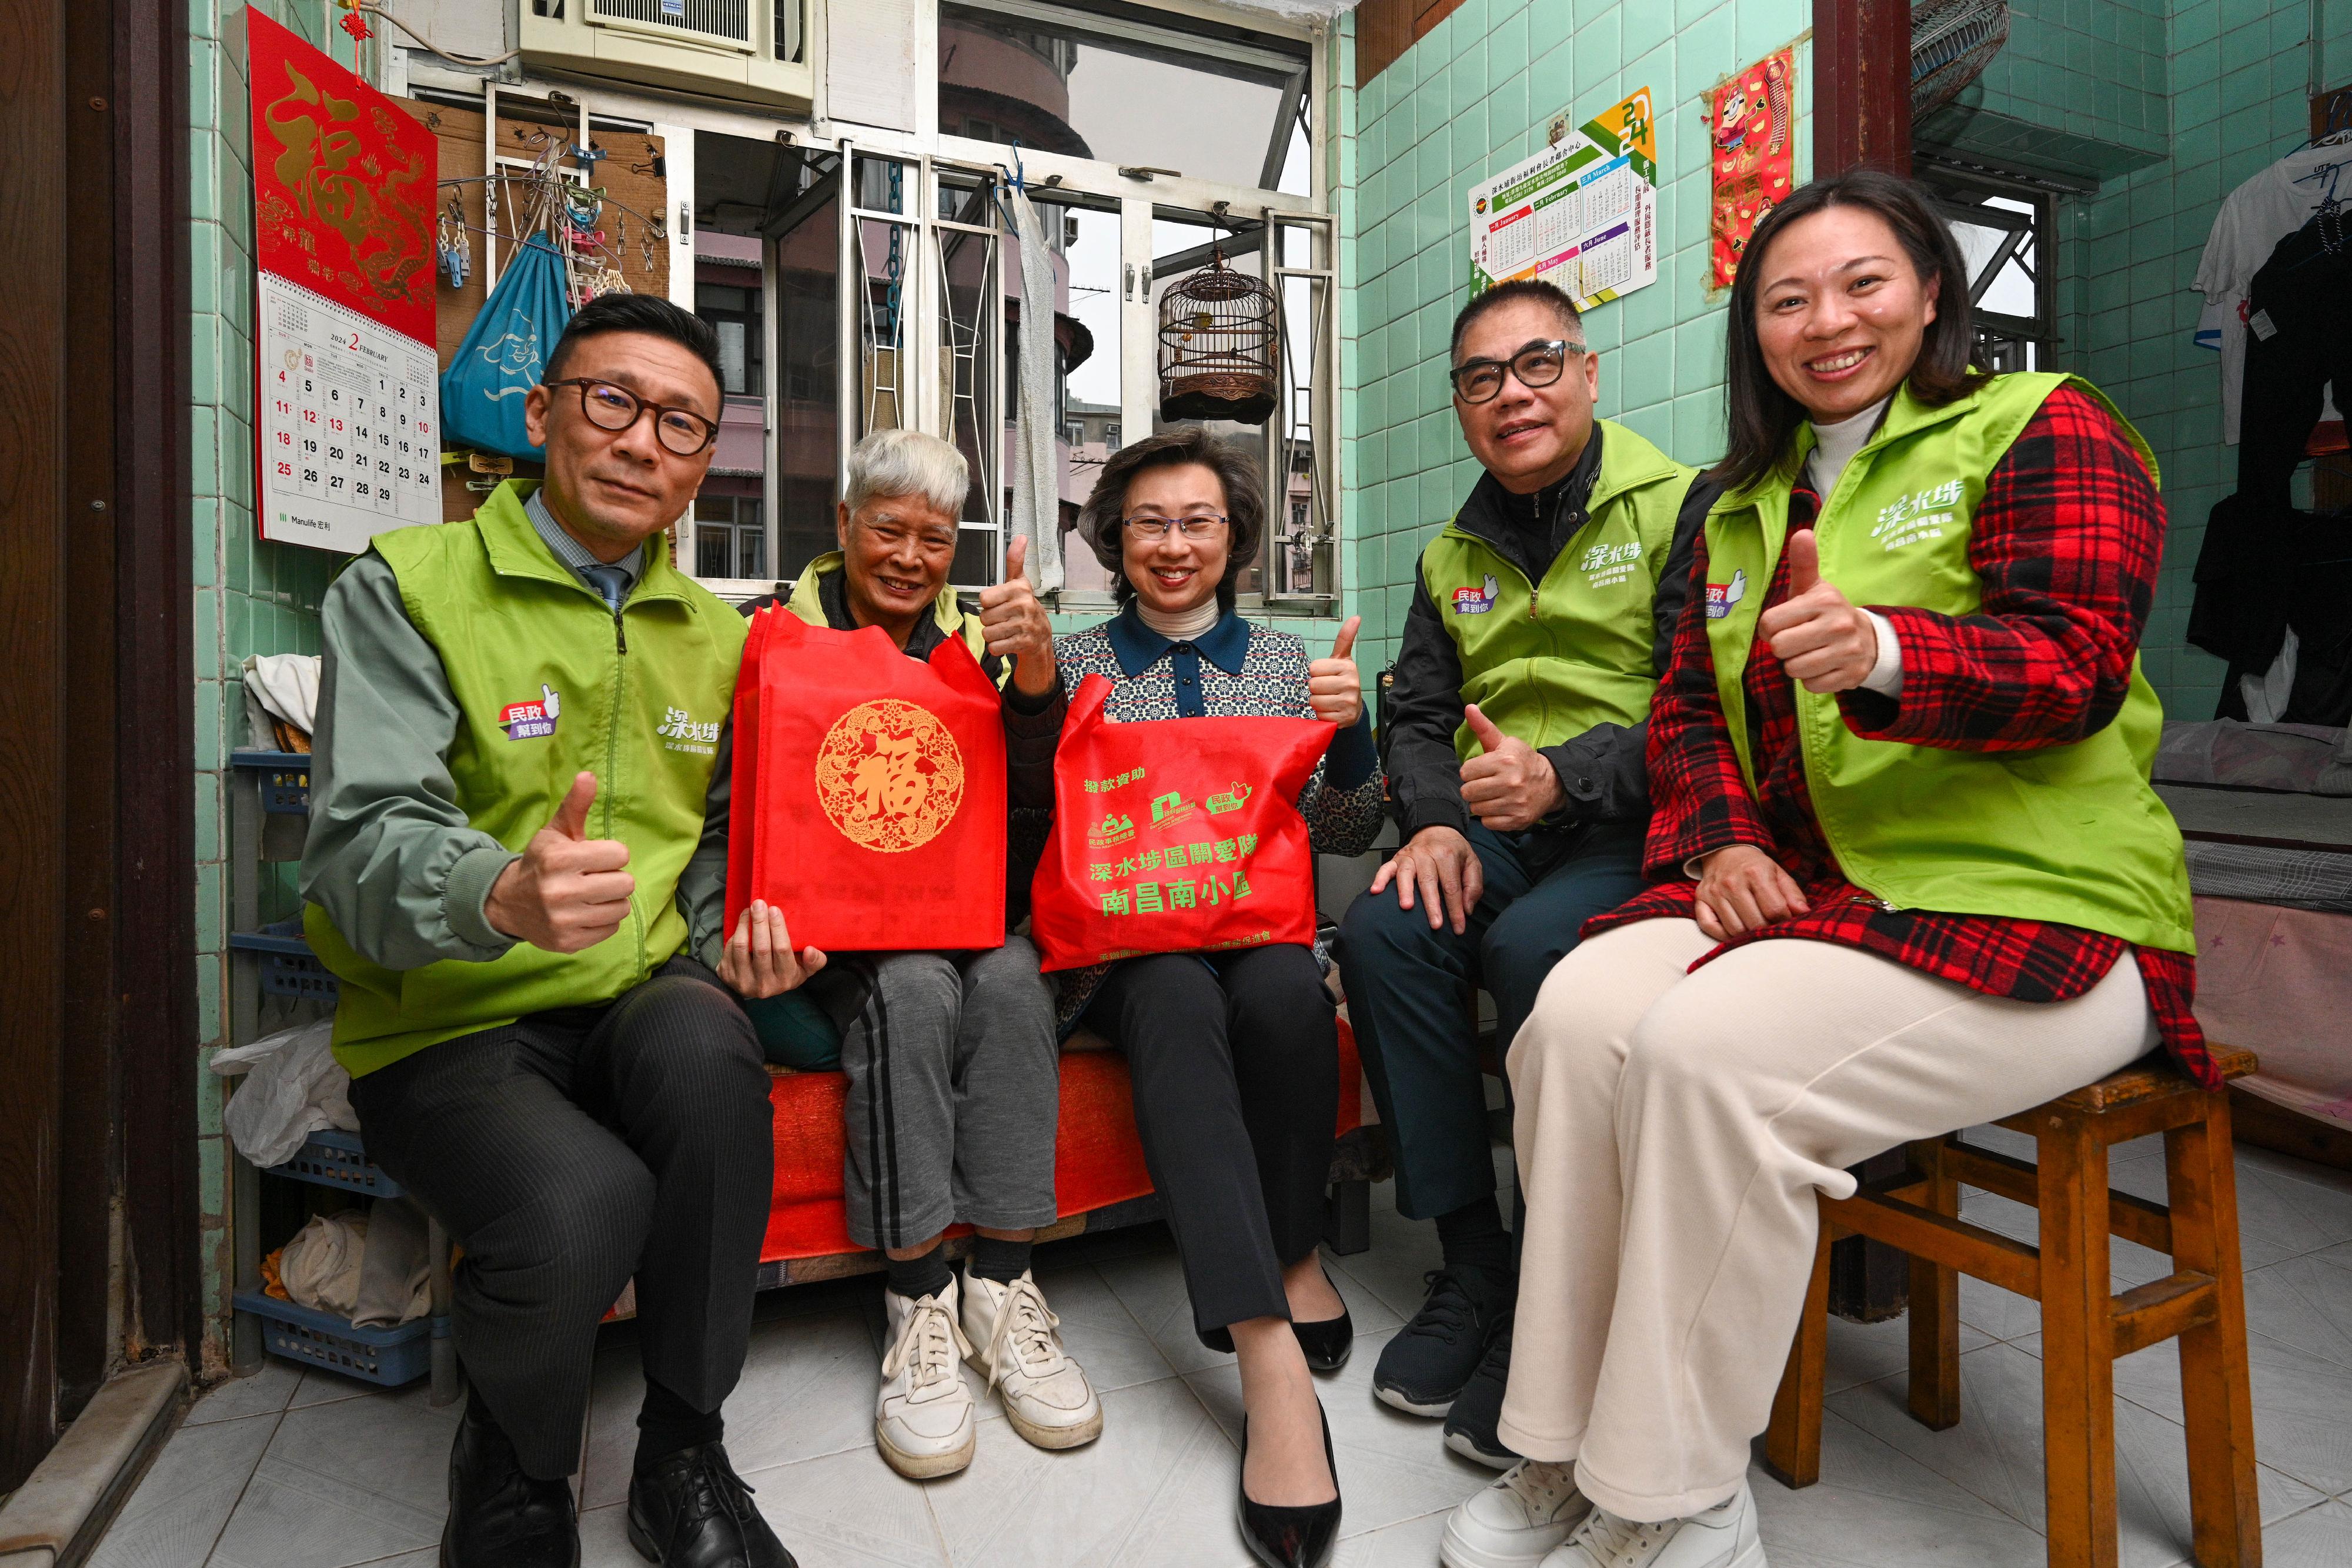 The Secretary for the Civil Service, Mrs Ingrid Yeung, visited singleton elderly people living on Apliu Street, Sham Shui Po, this evening (February 7) and distributed blessing bags to them in the run up to the Chinese New Year, with an aim at delivering seasonal greetings and celebrating the festive joy with citizens. Photo shows Mrs Yeung (centre), together with the District Officer (Sham Shui Po), Mr Paul Wong (first left); Sham Shui Po District Council member Ms Lau Pui-yuk (first right); and Sham Shui Po Nam Cheong South Sub-district Care Team captain, Mr Leung Kui-hoi (second right), visiting an elderly person and chatting with him on his daily life.